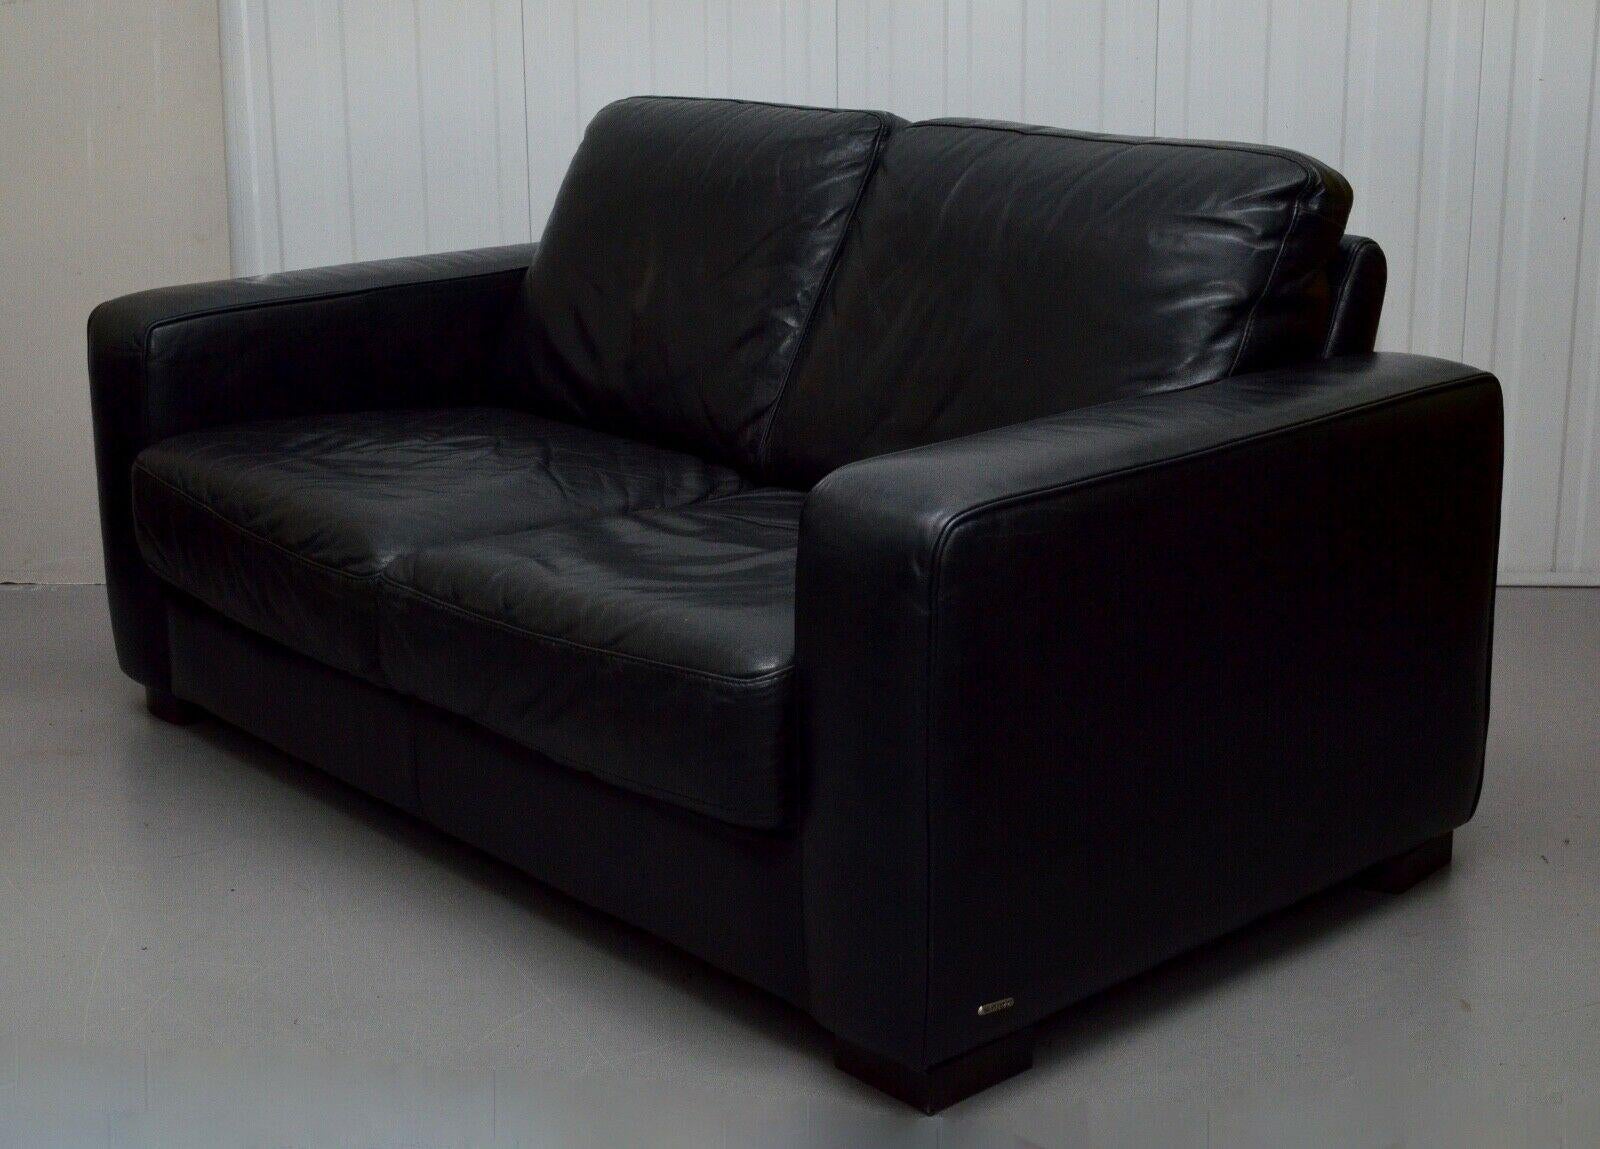 20th Century 1 of 2 FINE NATUZZI BLACK LEATHER TWO SEATER SOFAS MATCING ARMCHAIR AVAILABLE For Sale